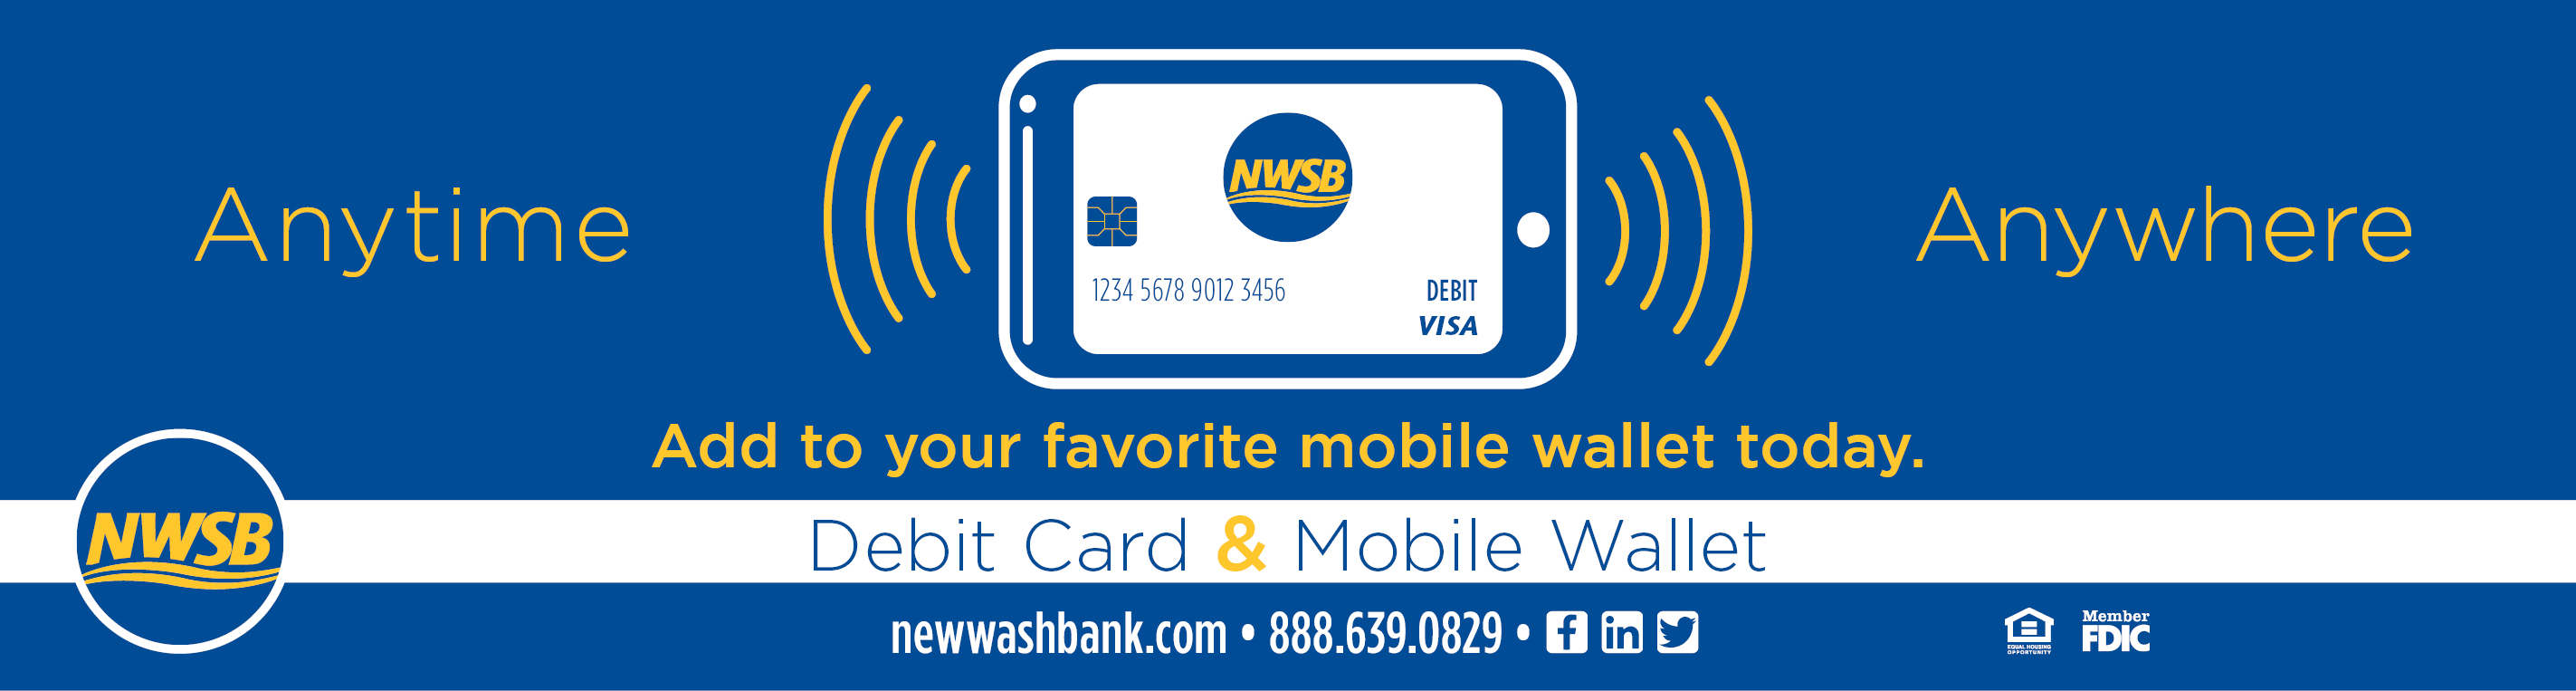 Anytime anywhere with your Debit Card and Mobile Wallet